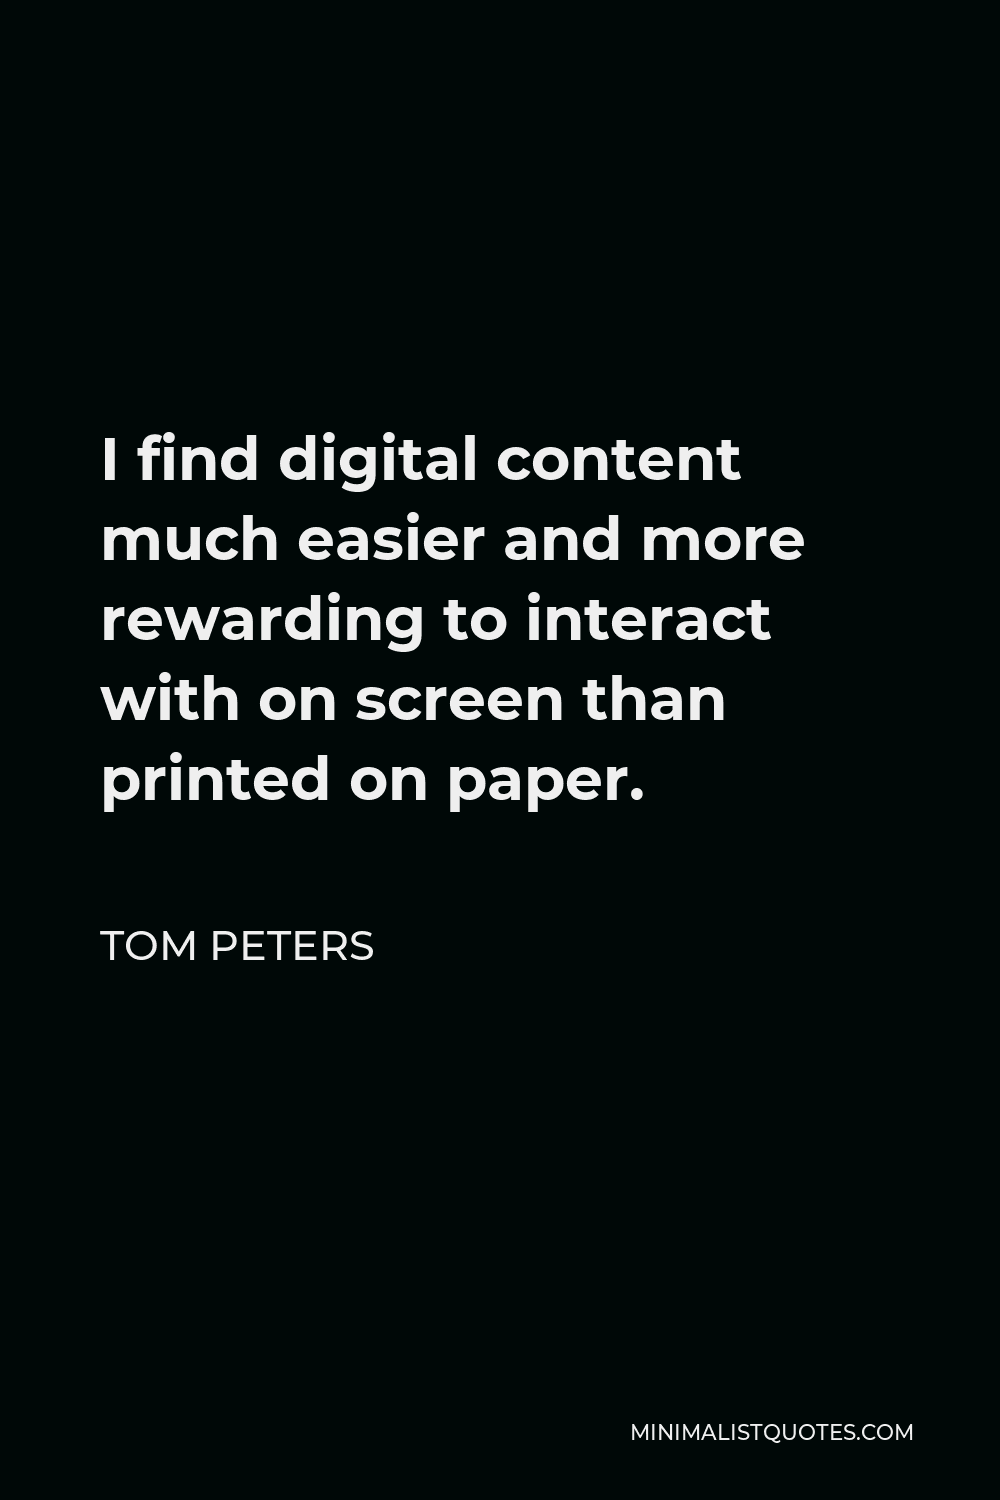 Tom Peters Quote - I find digital content much easier and more rewarding to interact with on screen than printed on paper.